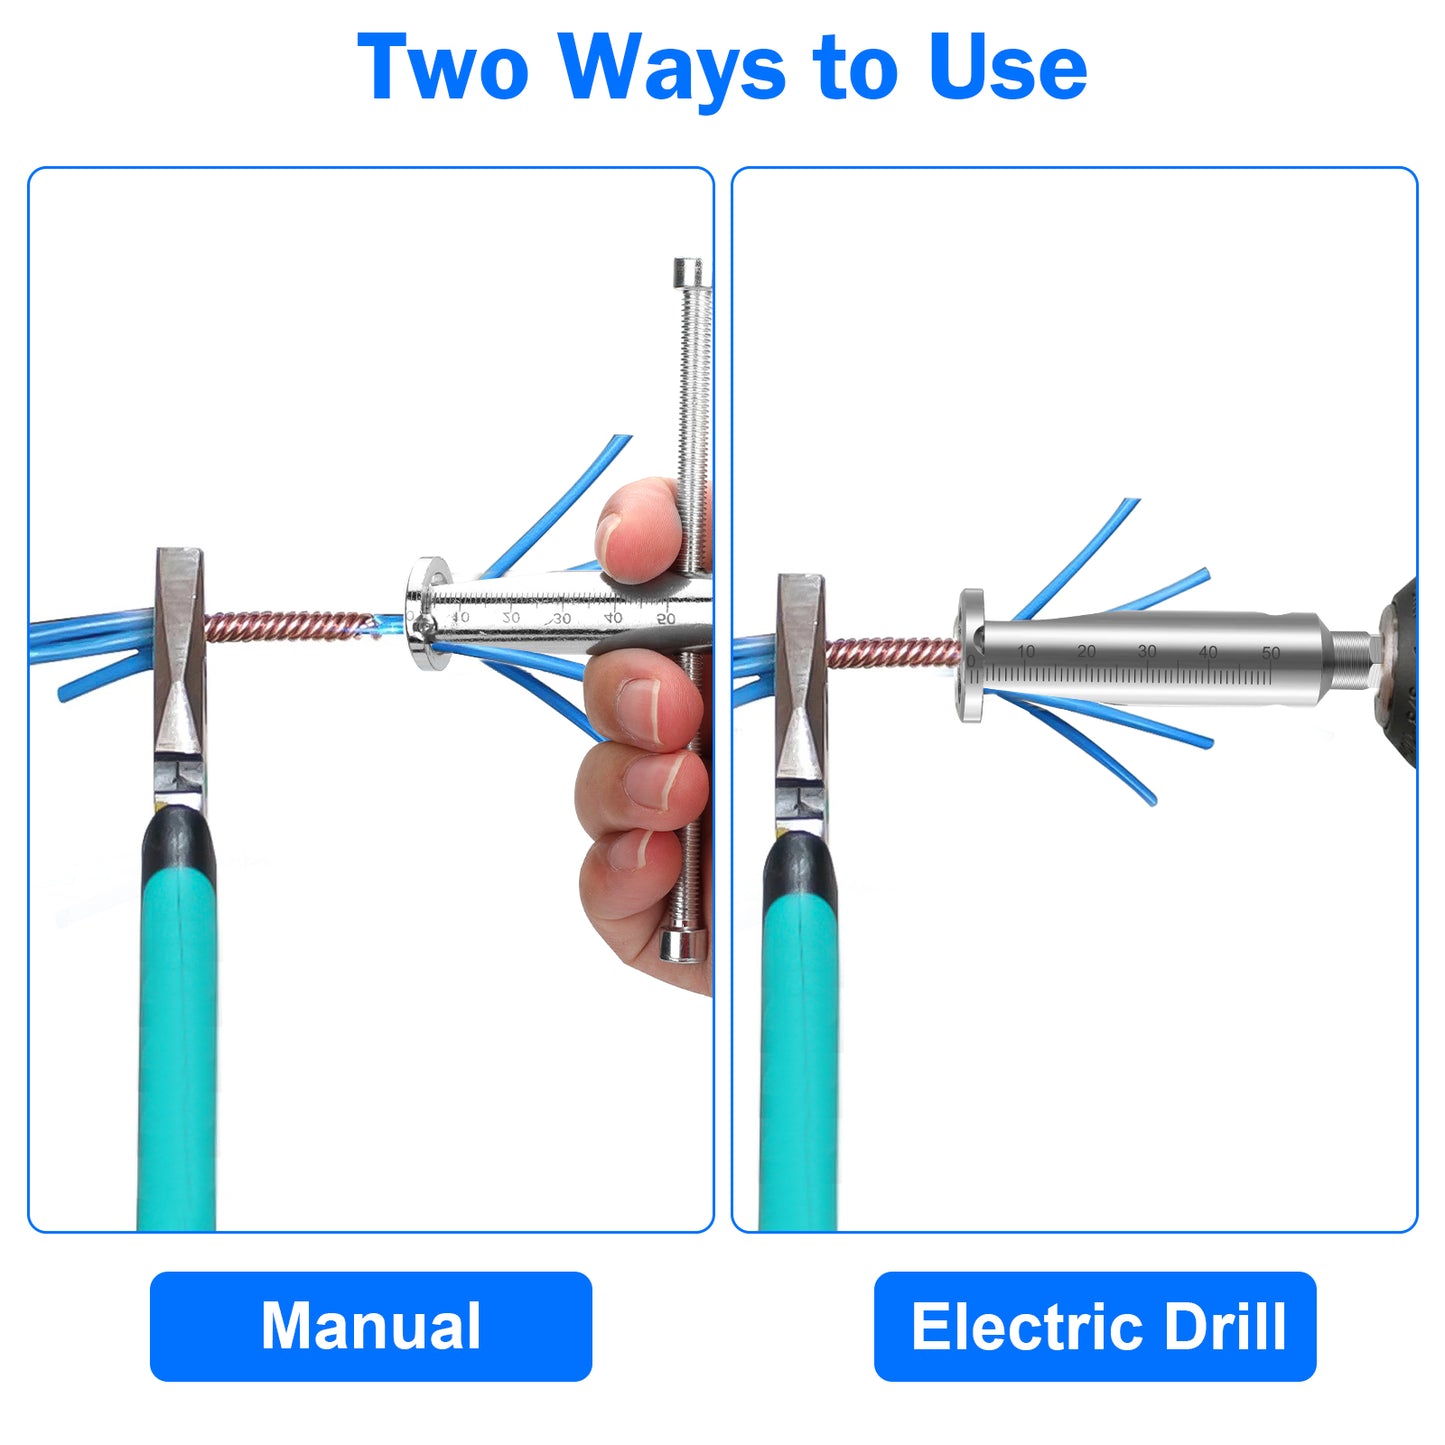 2pcs 2 in 1 Electrical Drill Manual Wire Stripping and Twisting Tool - Premium 45# Precision Steel,Twist 2-5 way wires,Enhance Efficiency for Power Drill Drivers (2.5-4 Square)